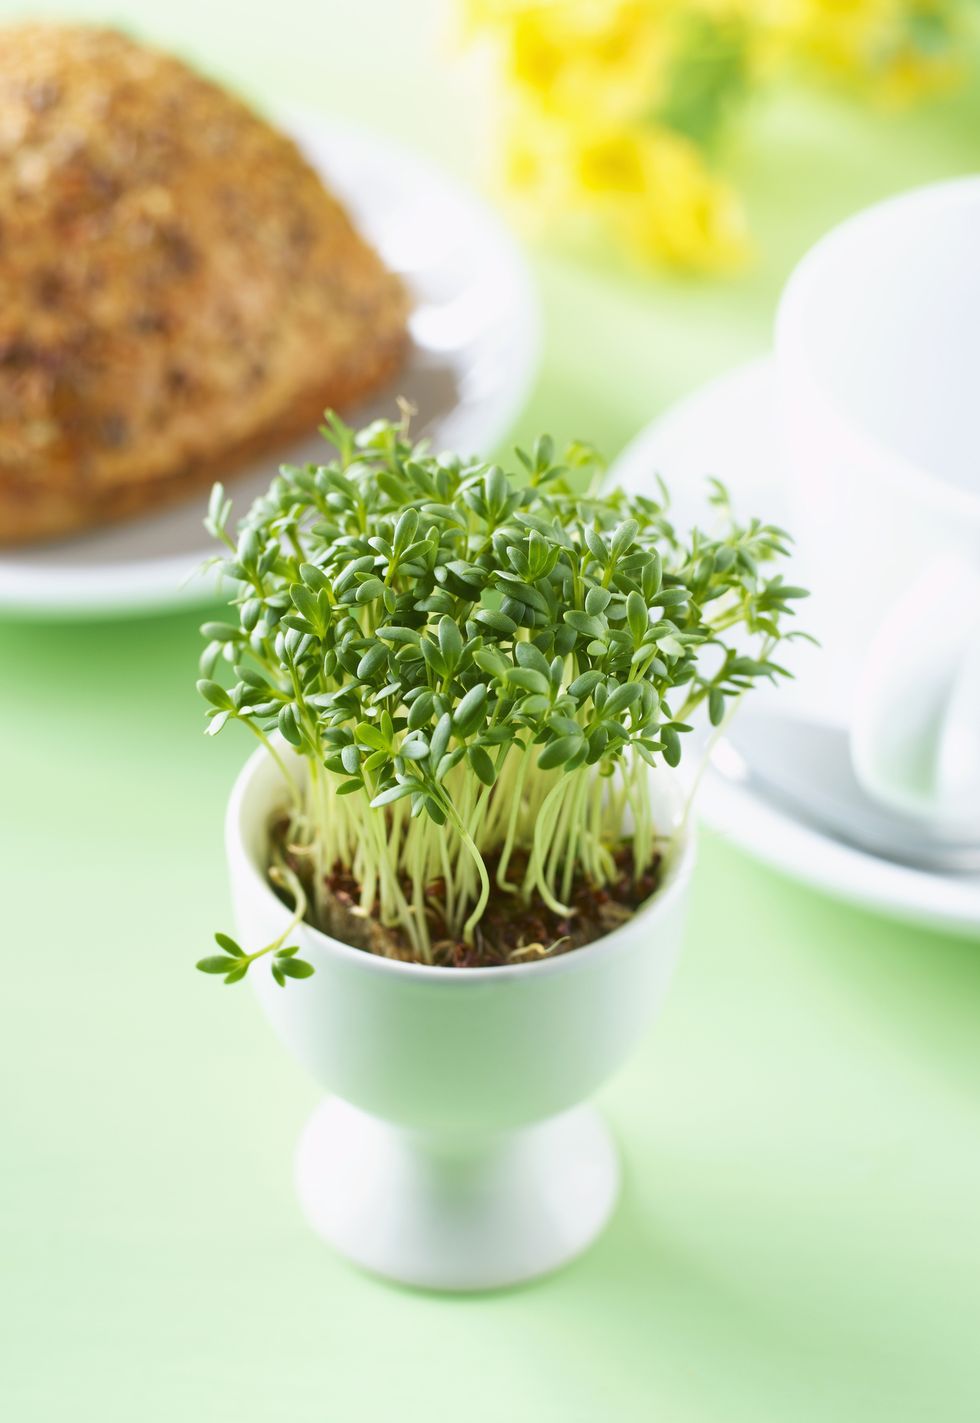 Egg cup with cress growing inside